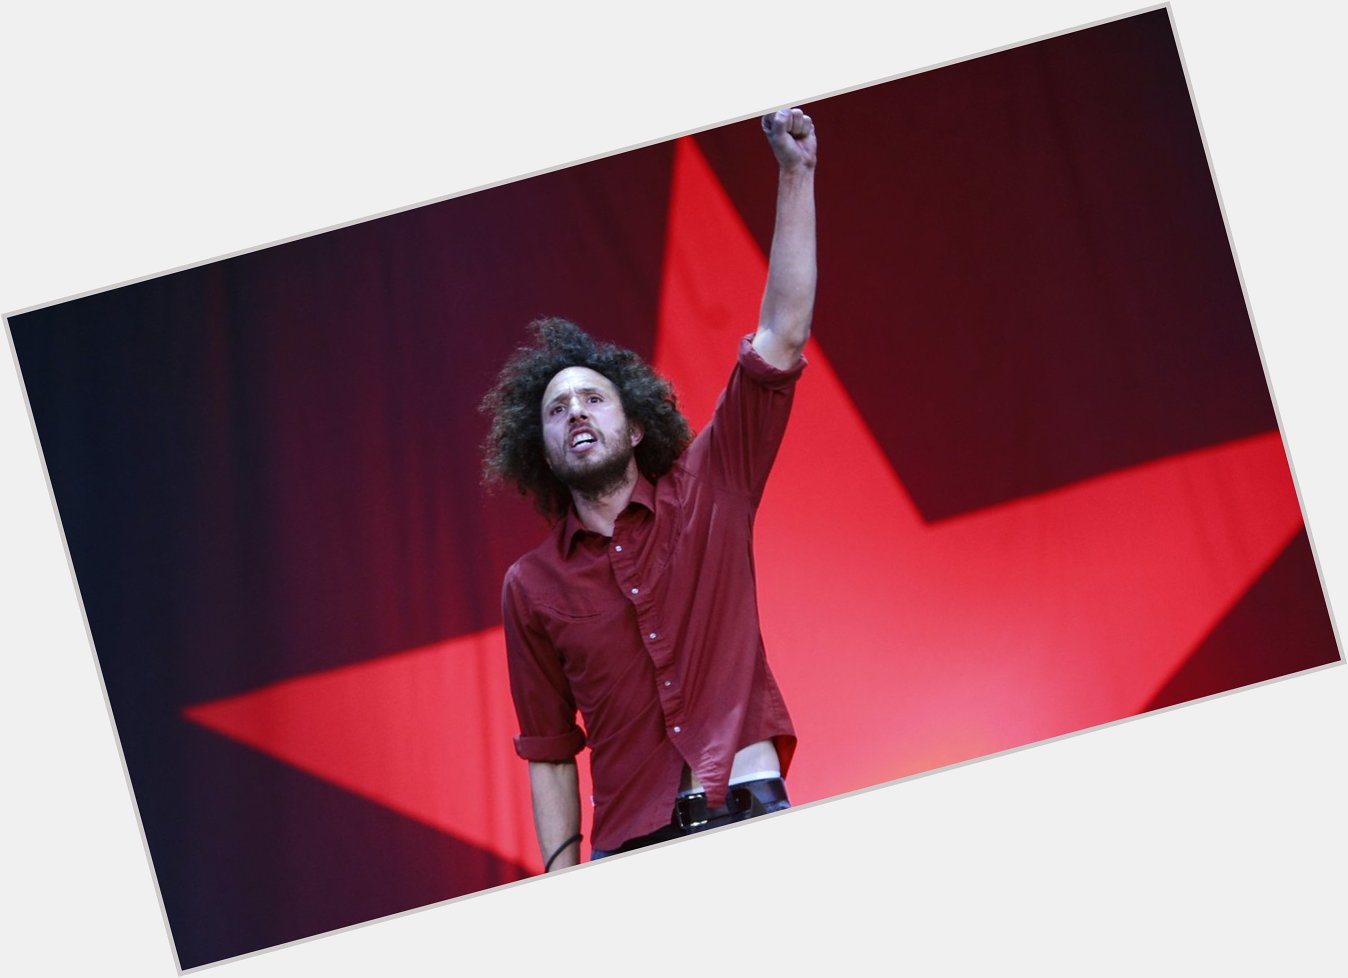 January 12, 1970

Happy birthday to the one and only Zack de la Rocha of Rage Against The Machine. 